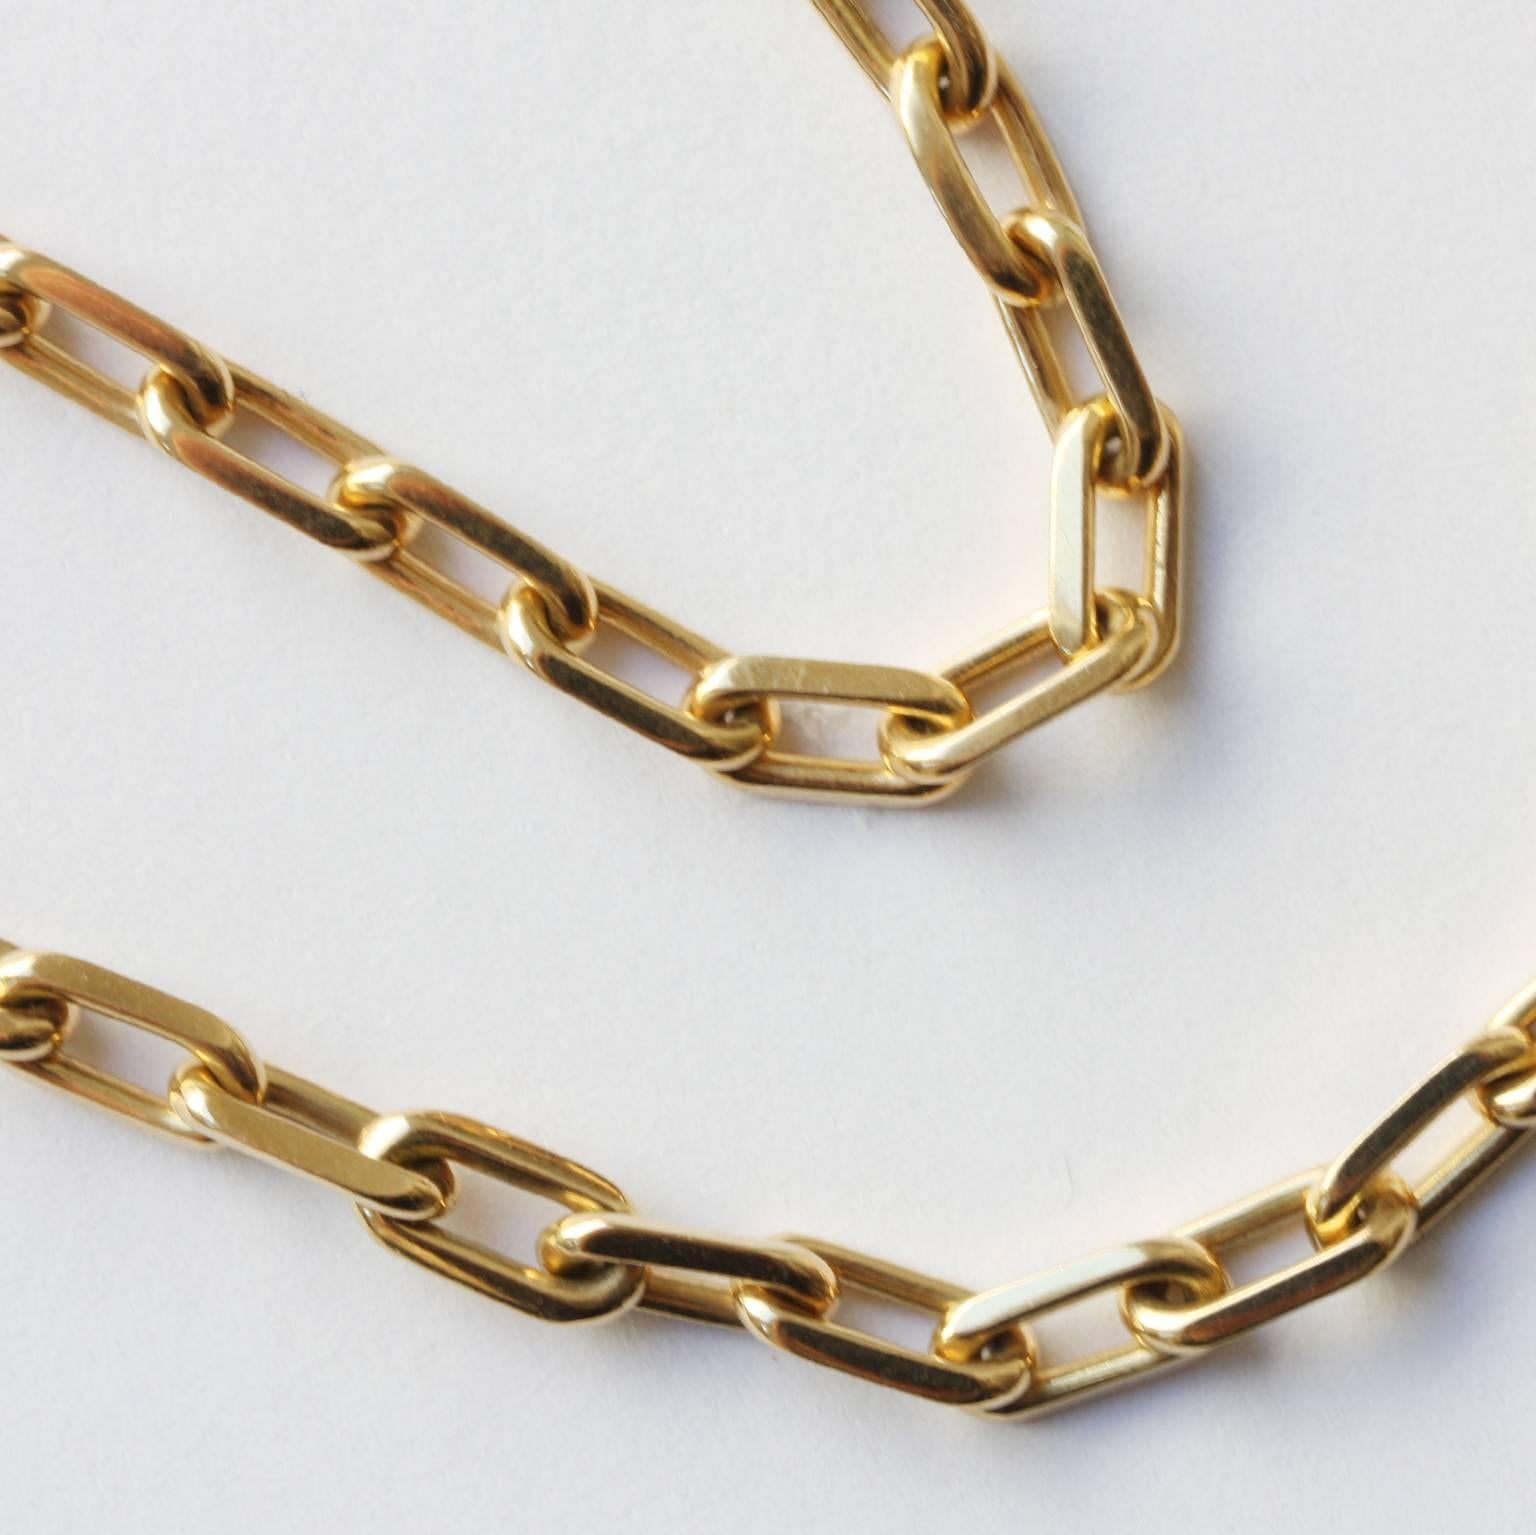 An 18 carat gold link chain, signed and numbered: Cartier, C65228, model: , dated: 1991.

weight: 31 gram
dimensions: 57 x 0.4 cm